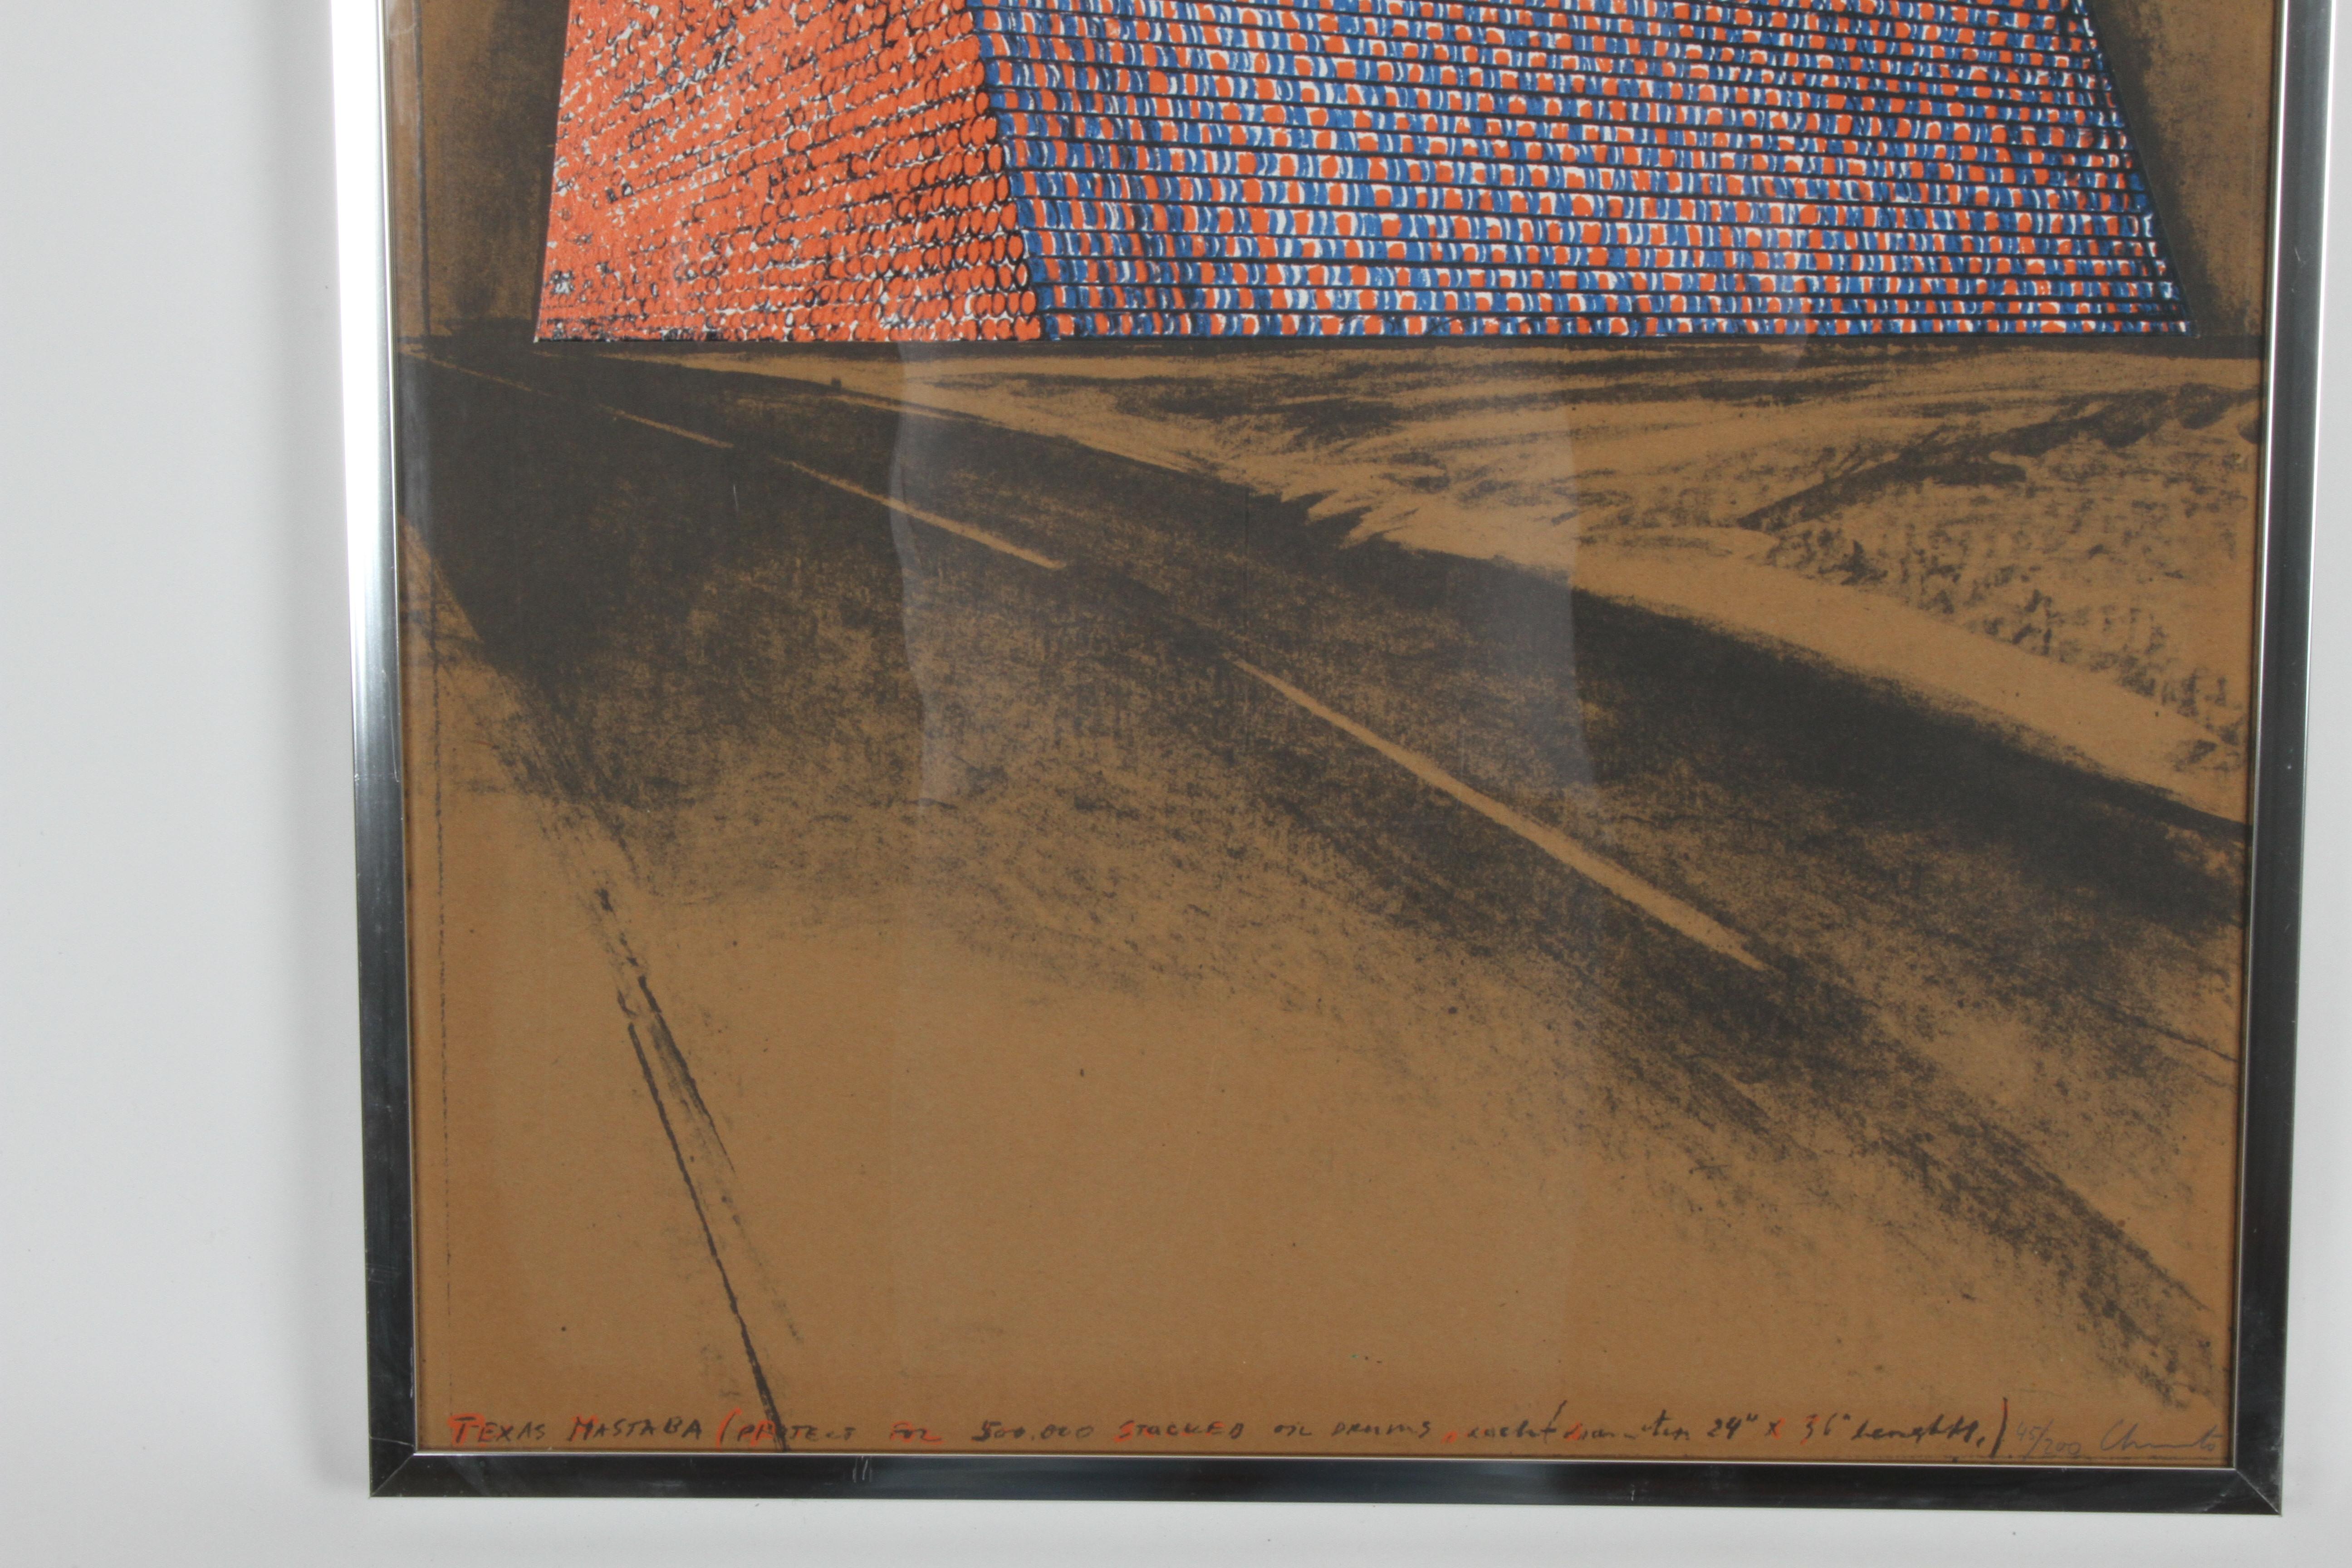 American Christo, Texas Mastra Project for 500, 000 Stacked Oil Drums, Signed Lithograph For Sale